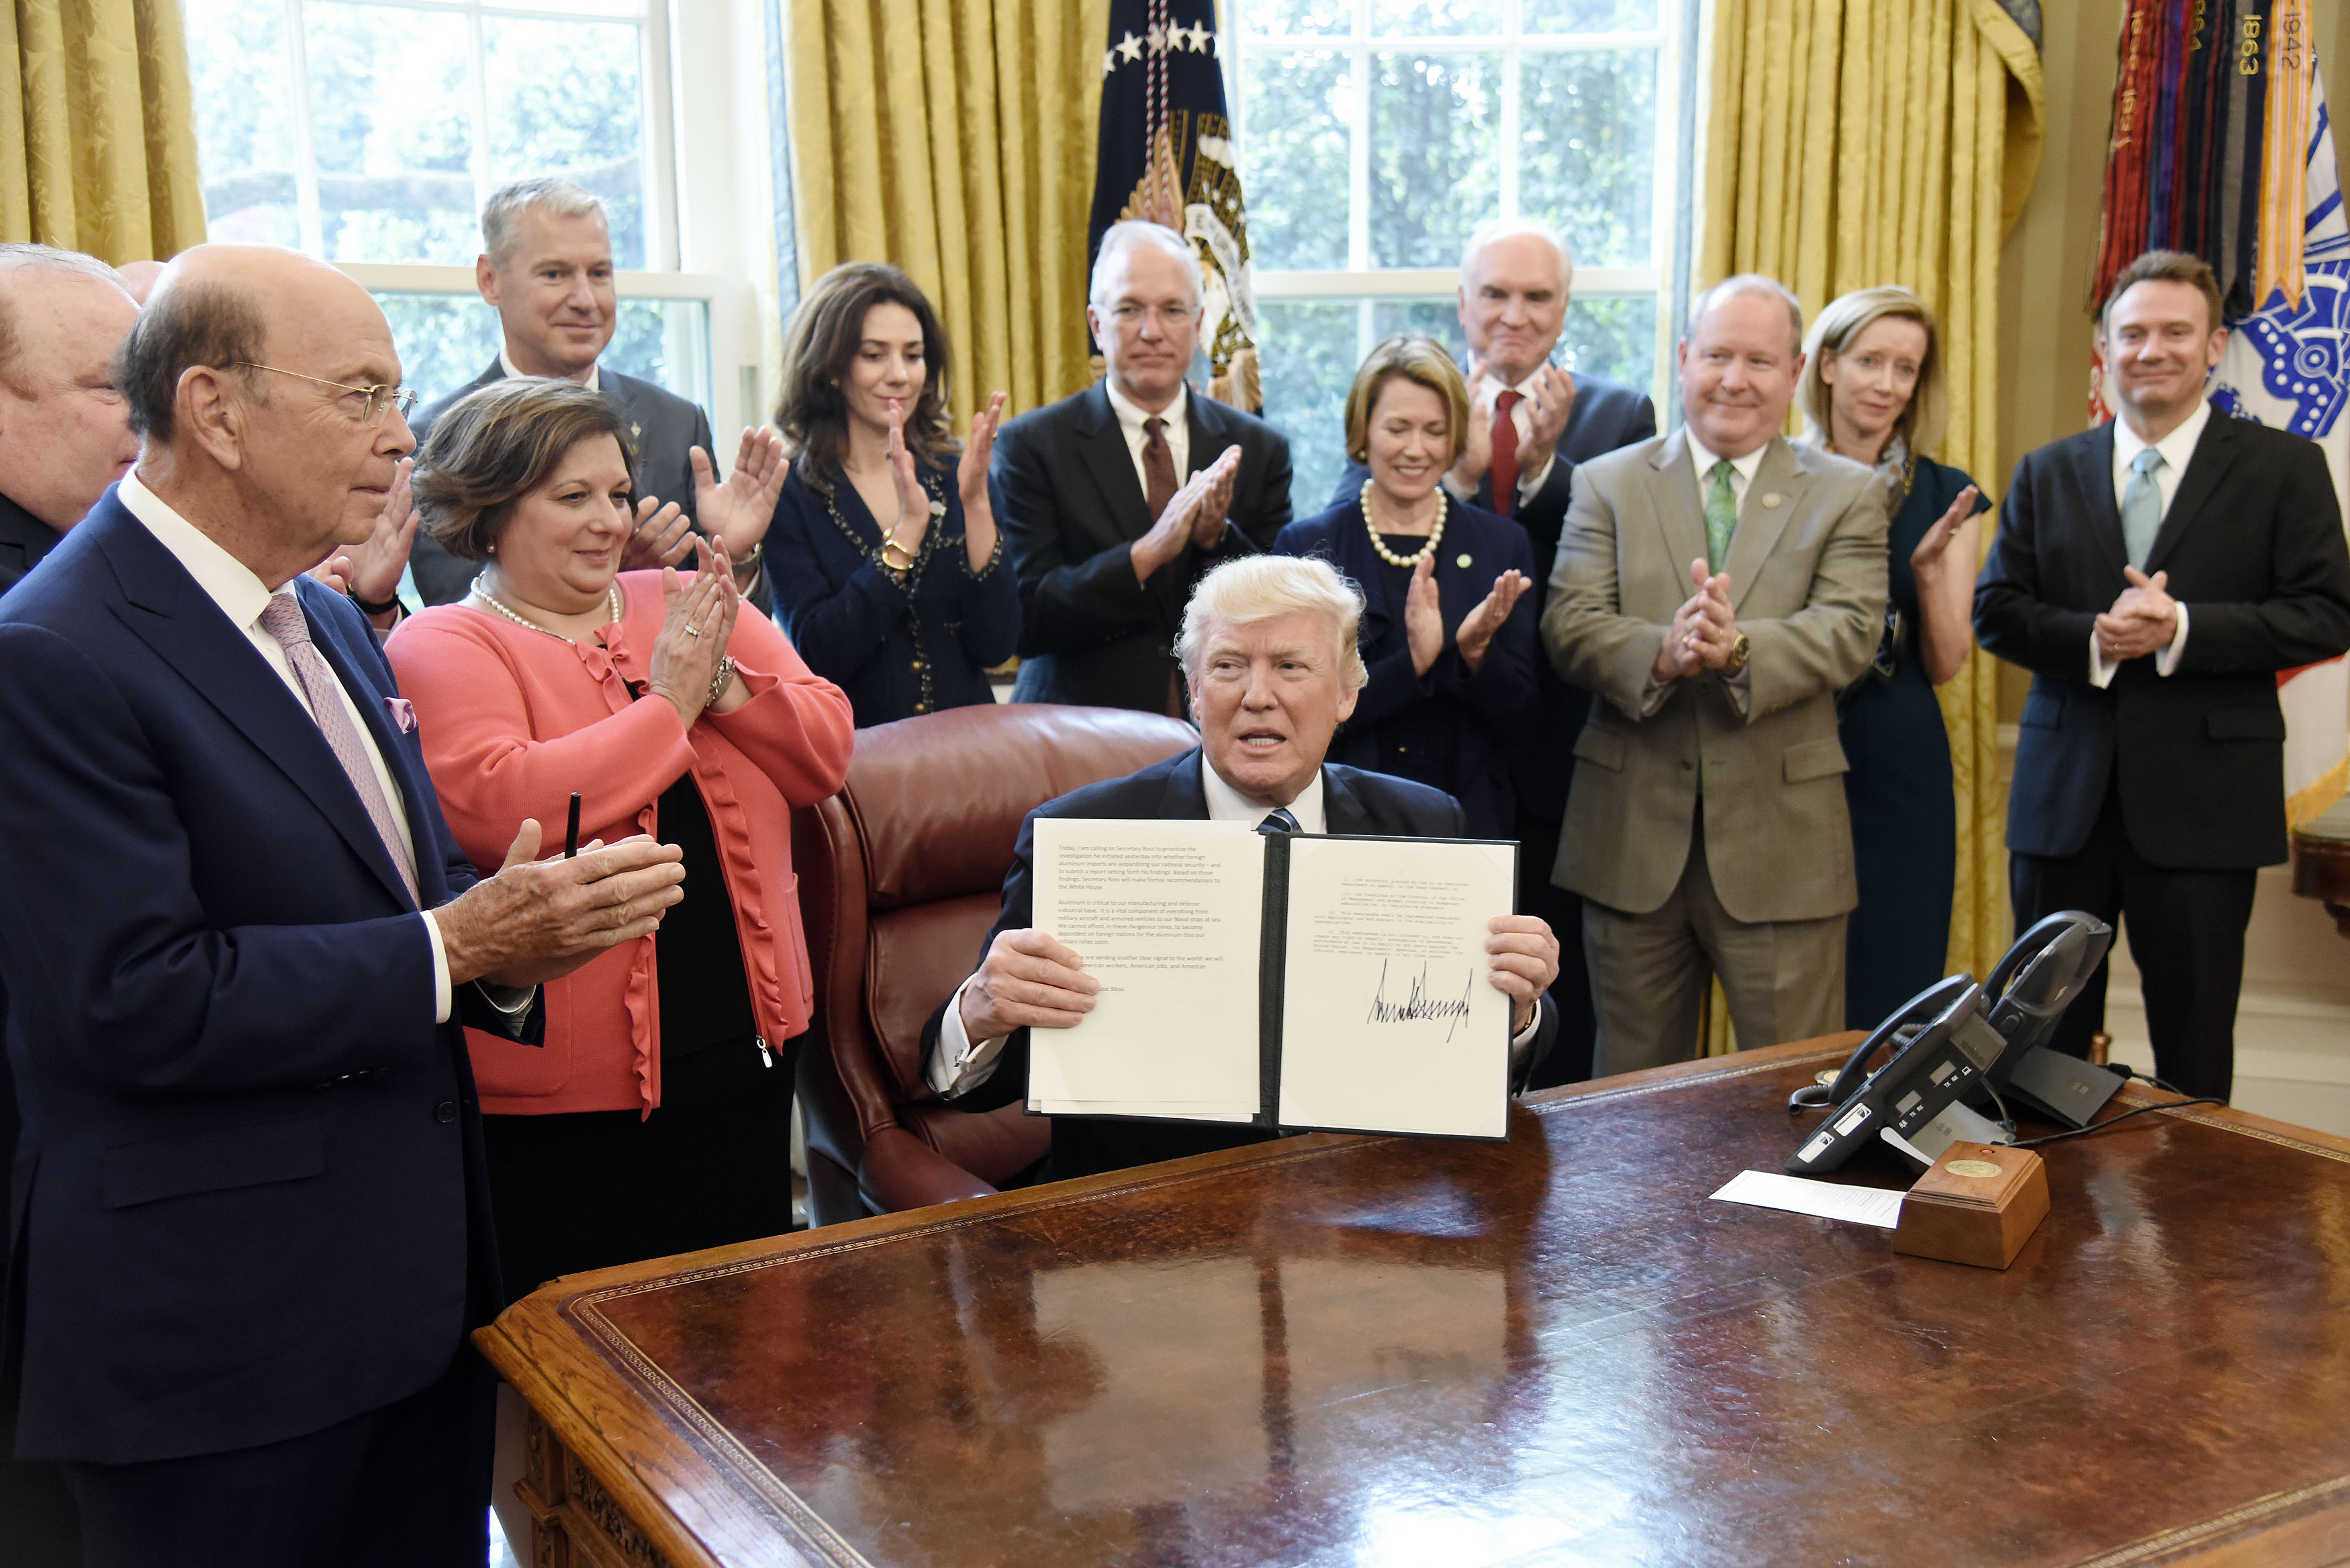 Photo of aluminum industry executives in the Oval Office Donald Trump holding up a signed executive order